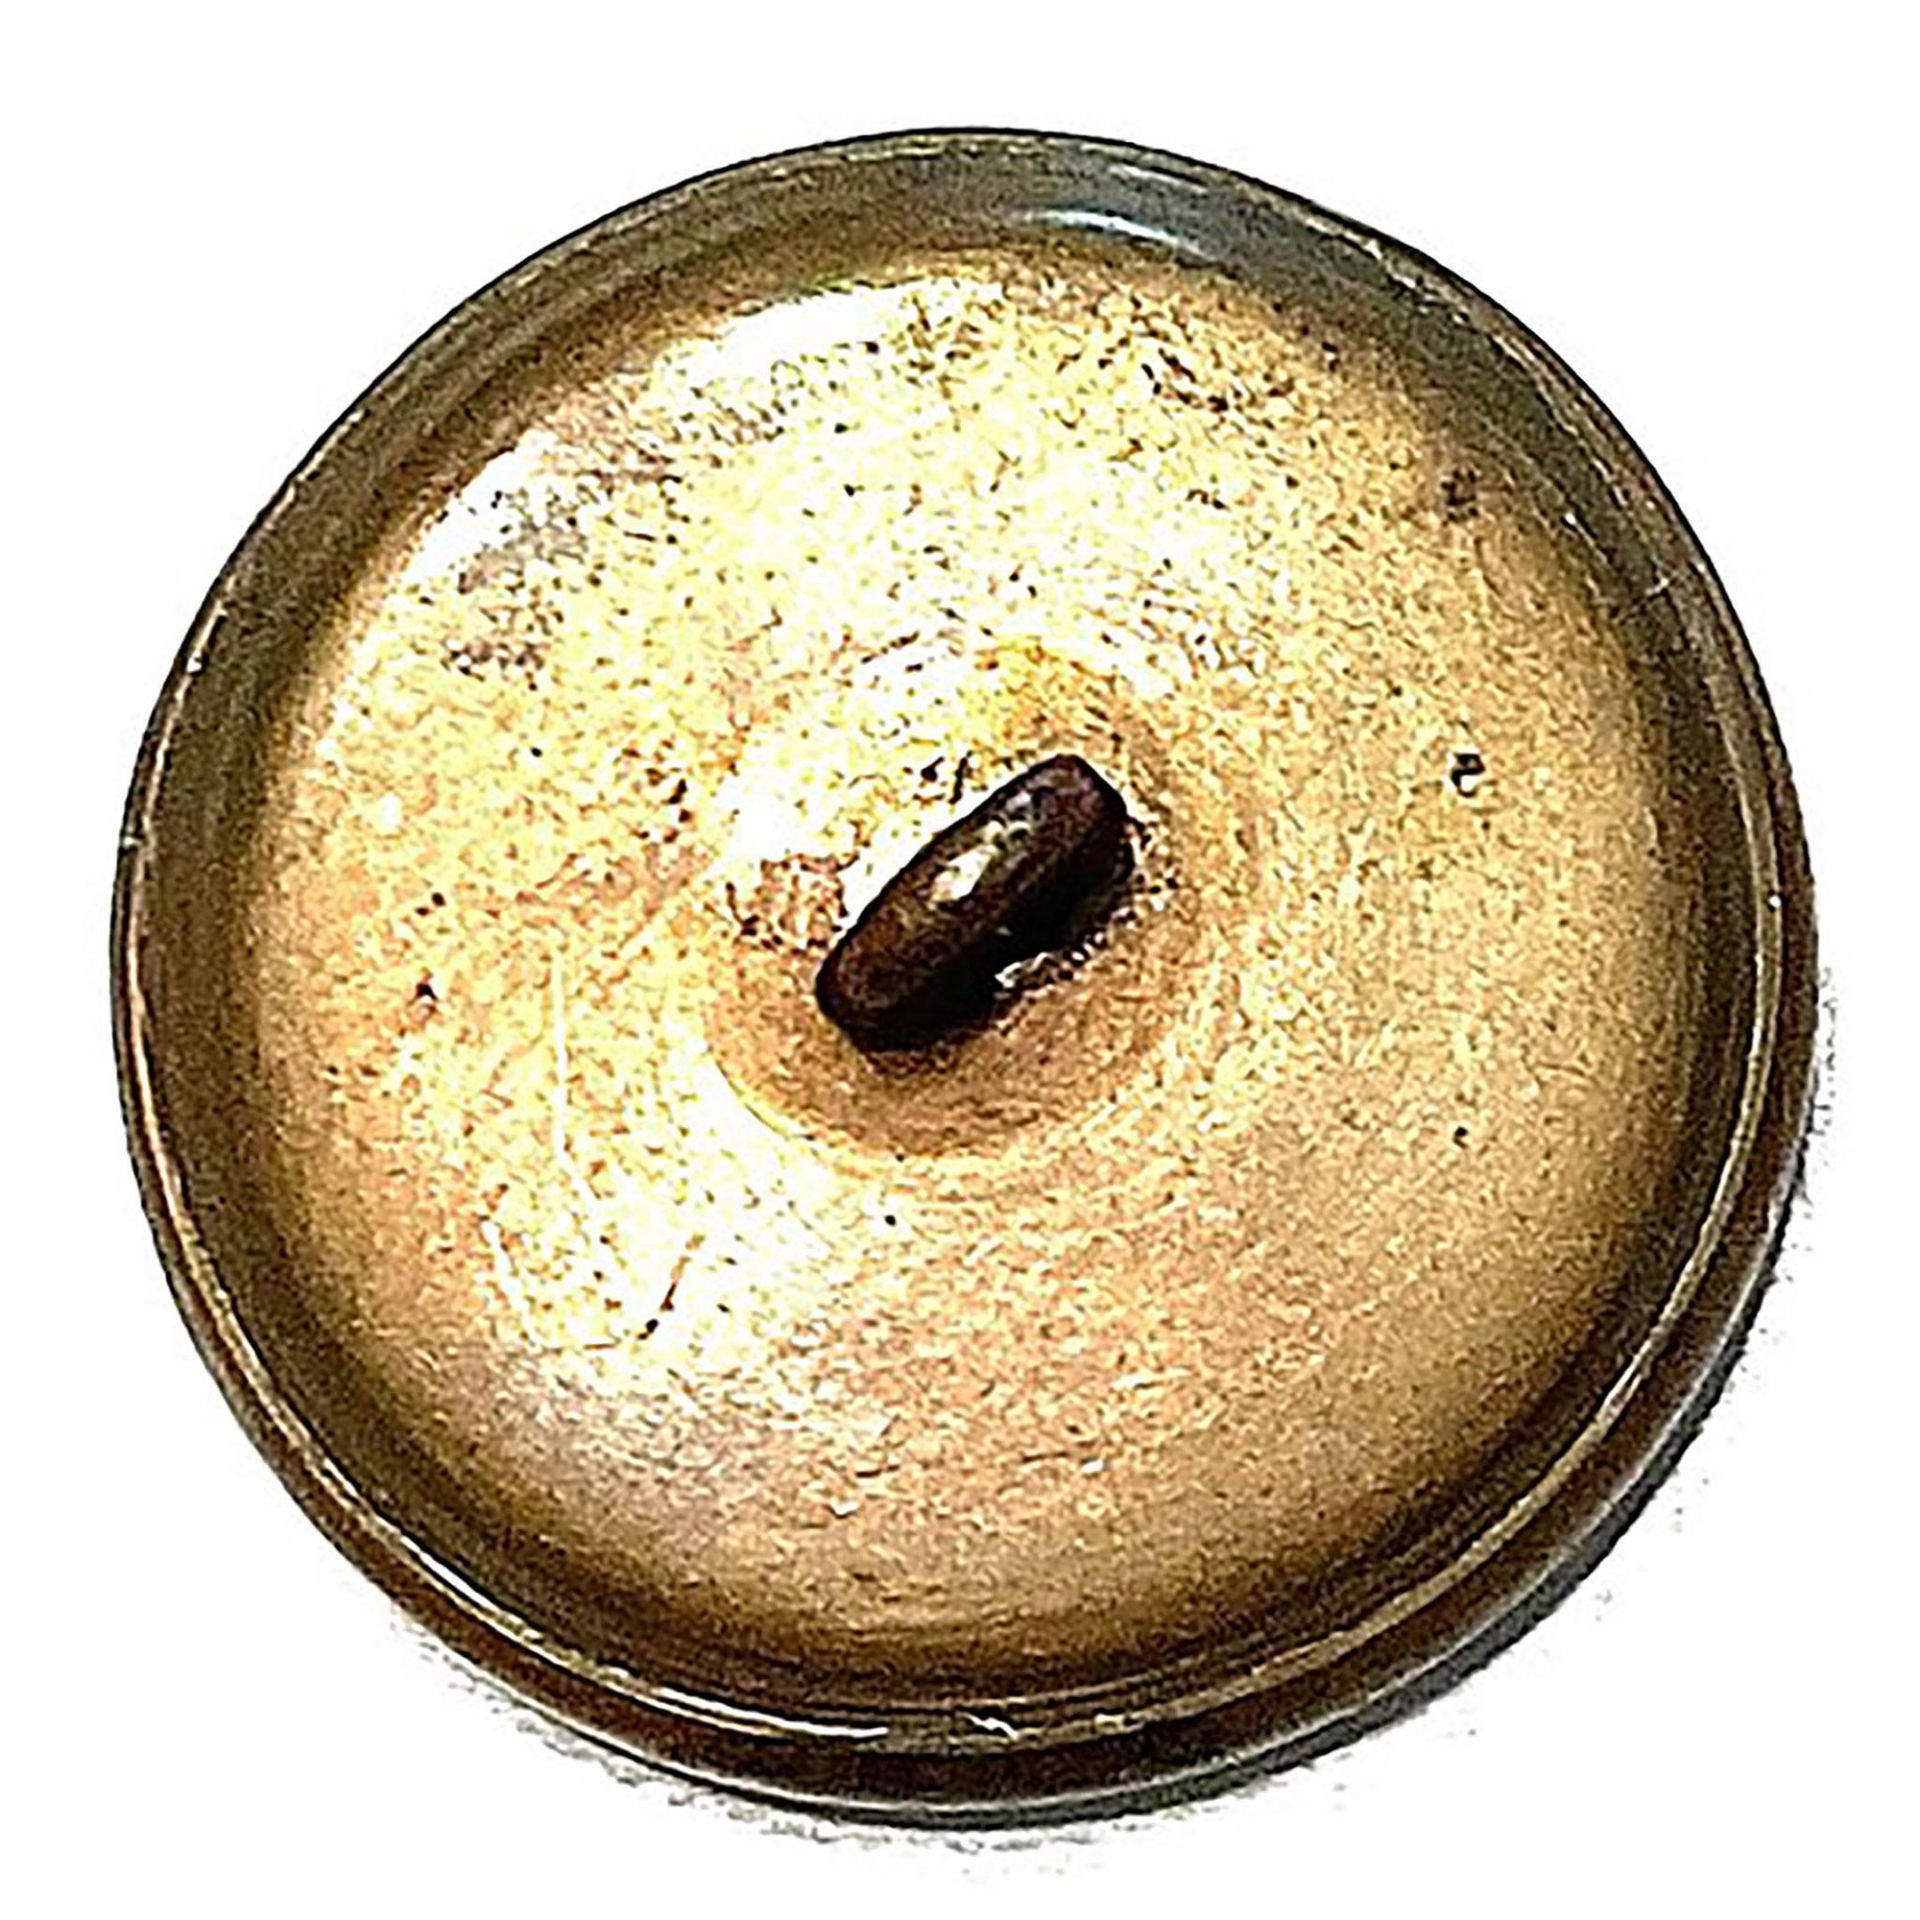 A division one porcelain in metal button - Image 2 of 2